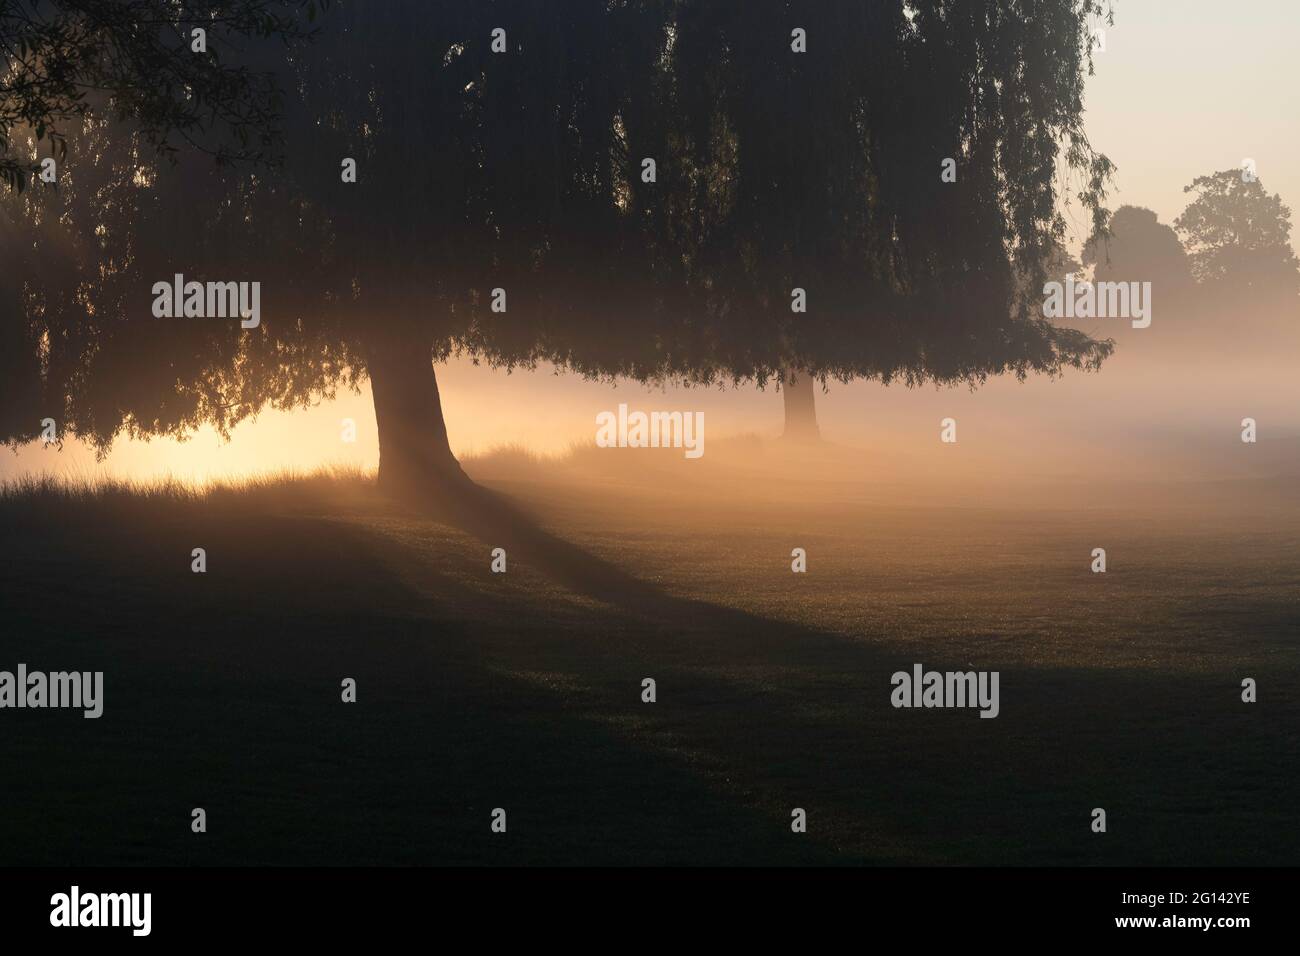 Willow trees silhouetted in the misty morning sunrise Stock Photo